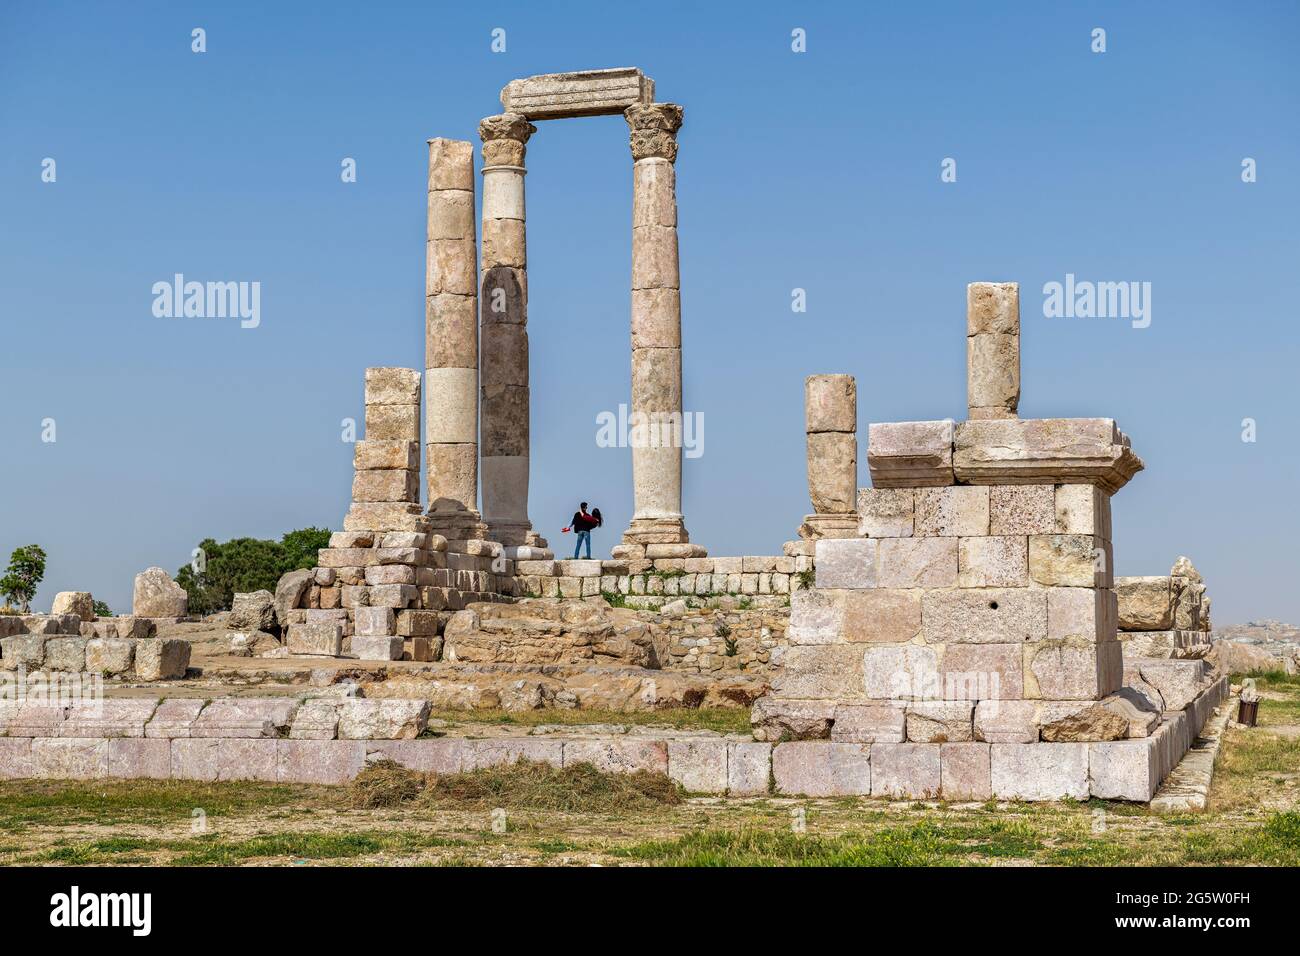 Temple of Hercules in the Amman Citadel is a historical site at the center of downtown Amman, Jordan. In Arabic it is known as Jabal al-Qal'a. Stock Photo